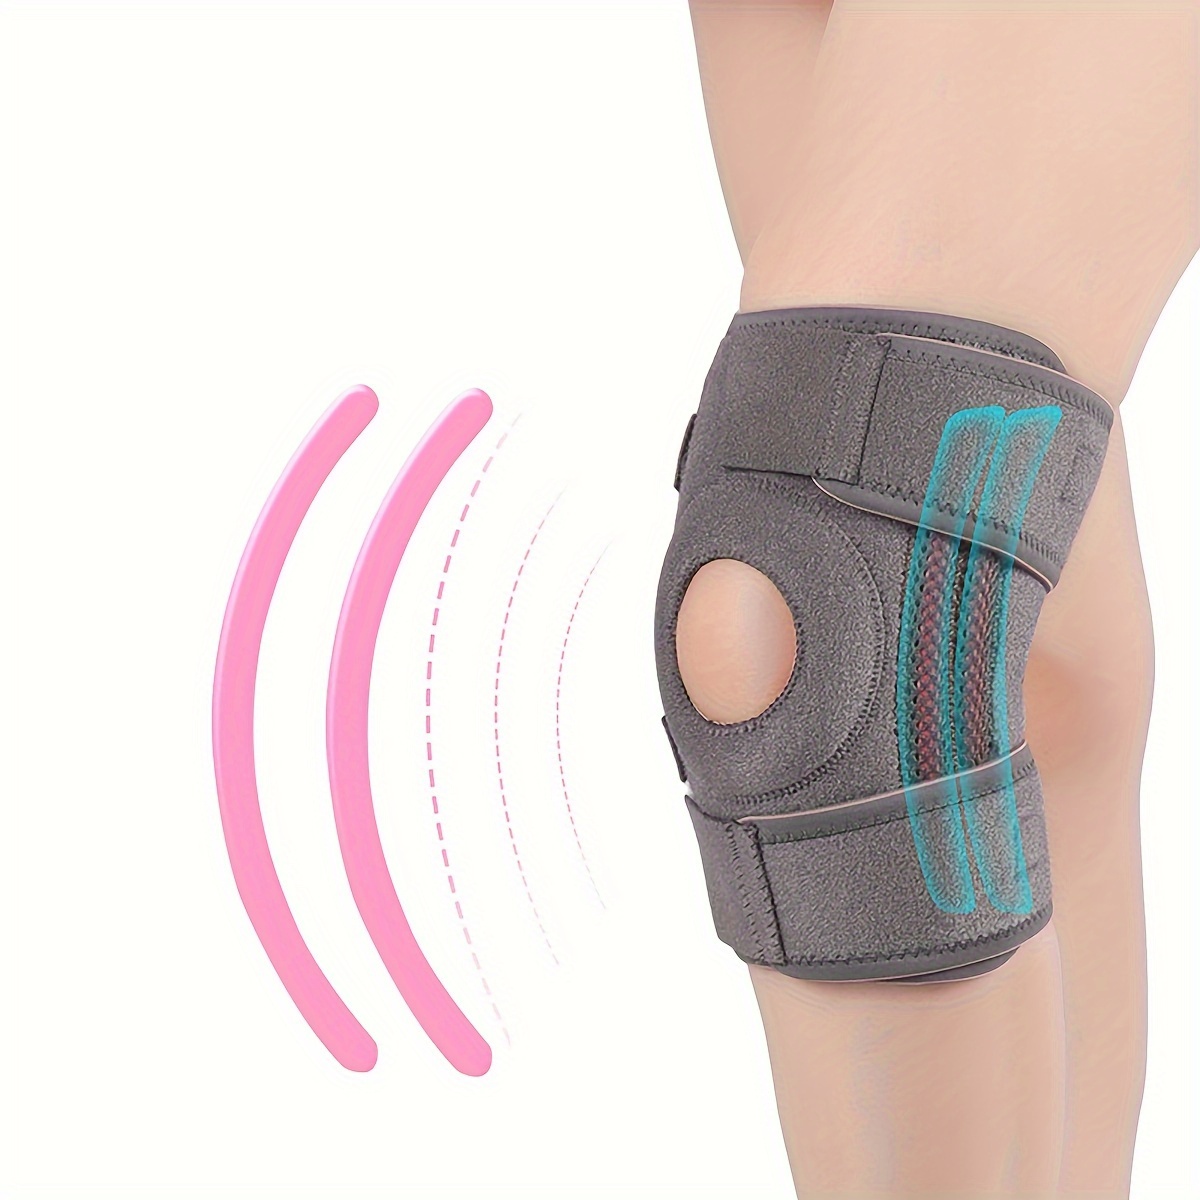 Bracetop 1 Pc Adjustable Knee Braces For Knee Pain With Side  Stabilizers,effective Relieves Meniscus Tear, Acl,lcl,mcl,arthritis - Elbow  & Knee Pads - AliExpress